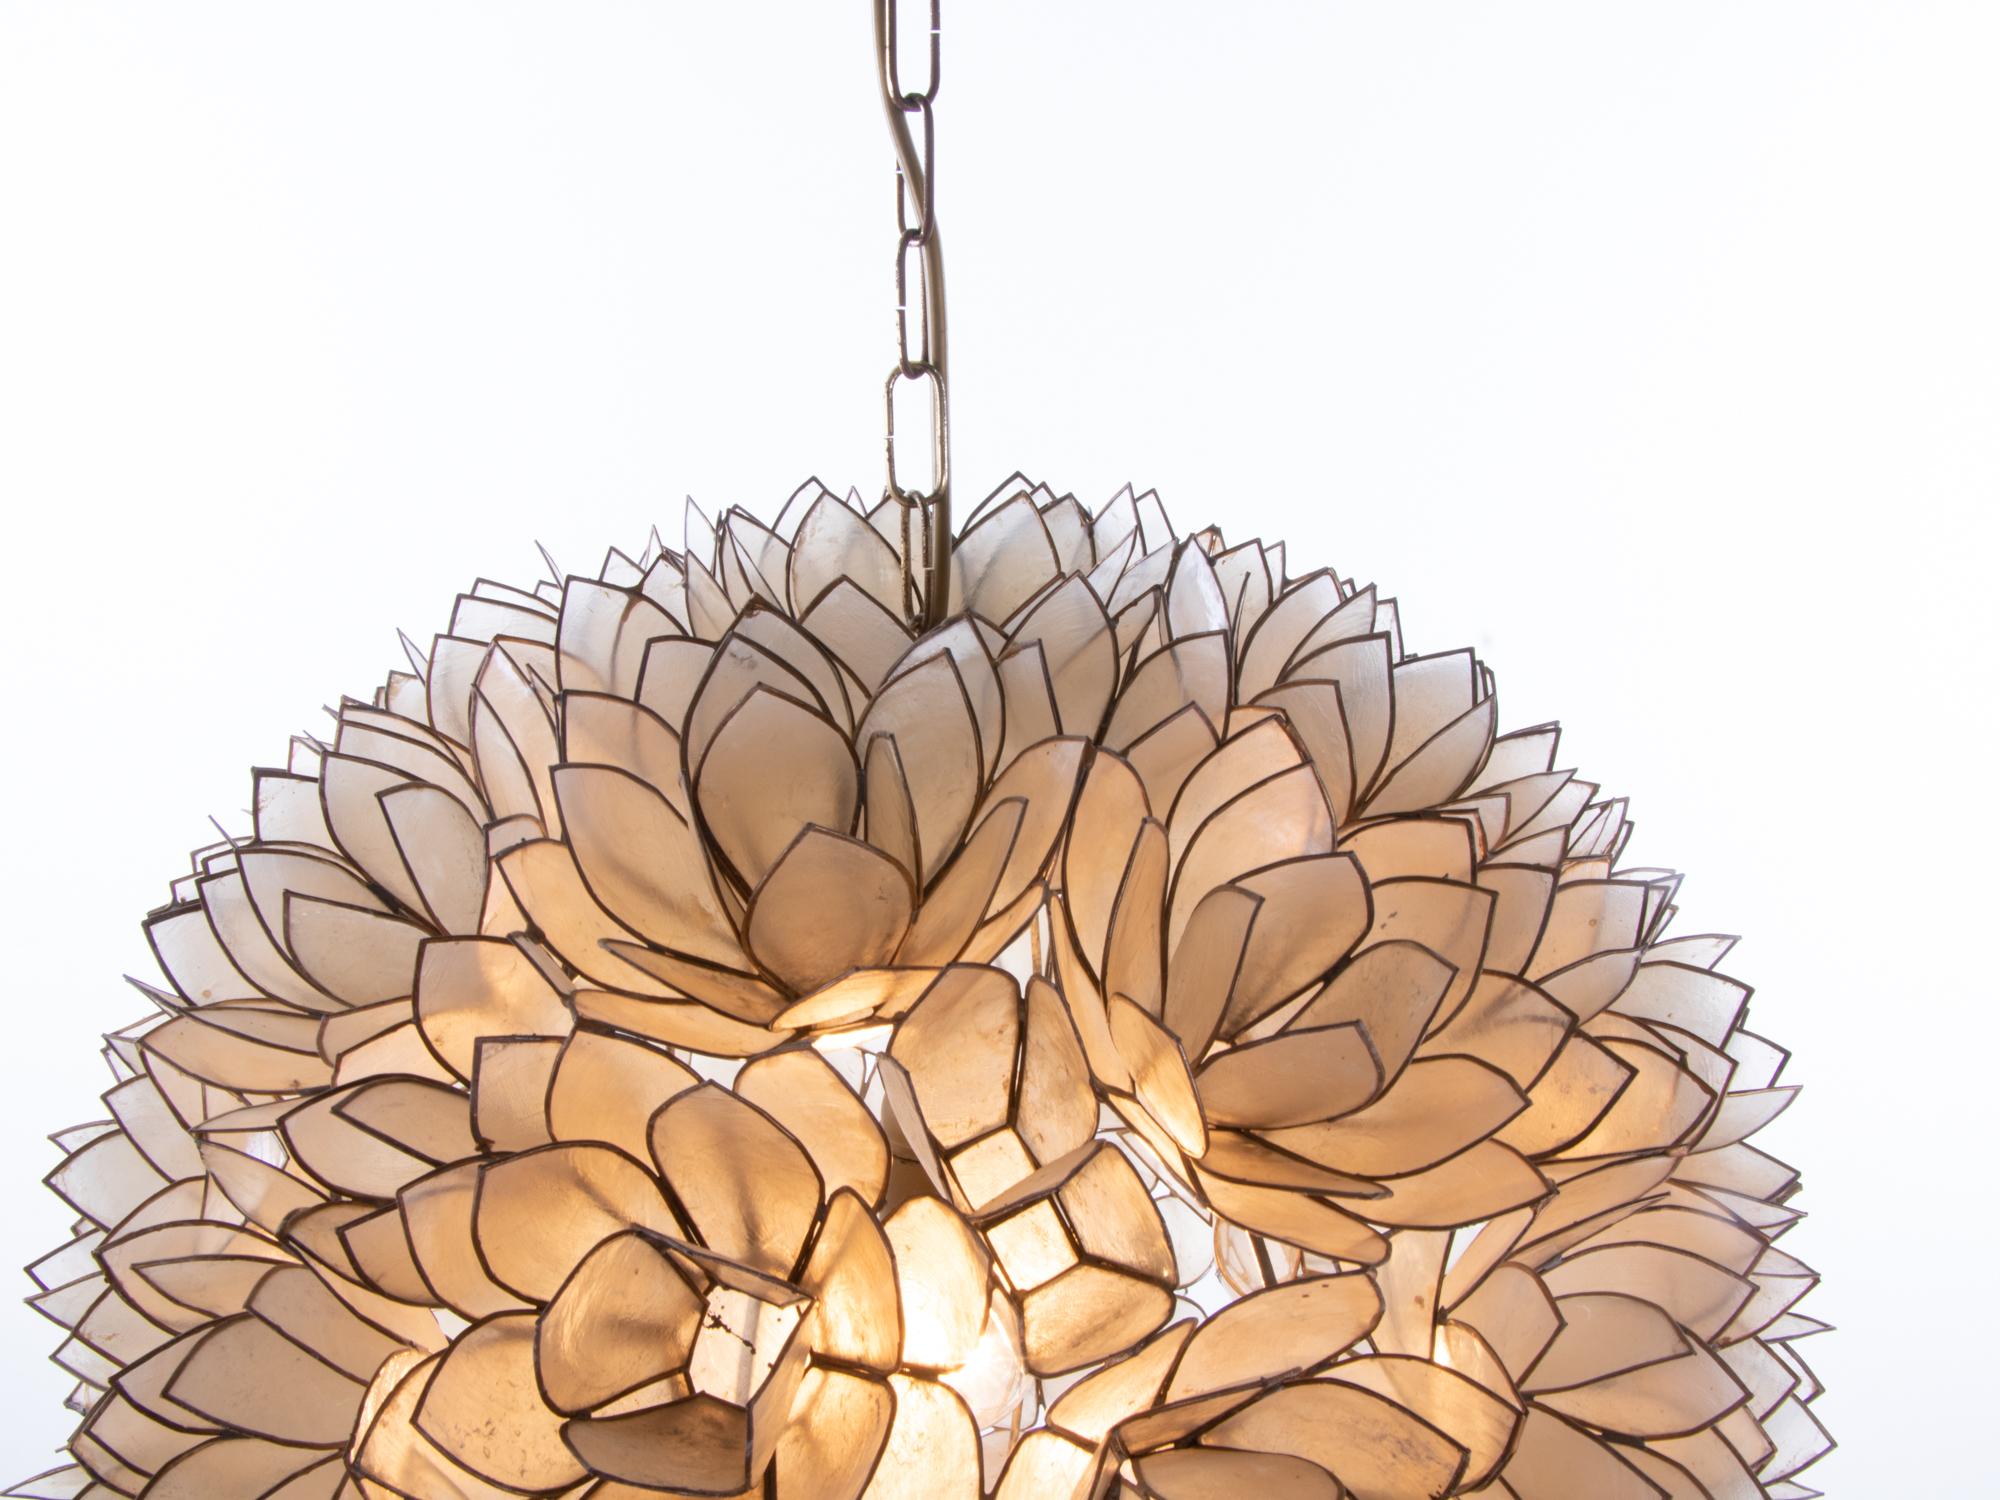 Elegant large globular lotus ball pendant light made in the 1960s. Each art glass was handcrafted and assembled in a lotus flower pattern. 

Measures: diameter 19.7” (50 cm), height 51